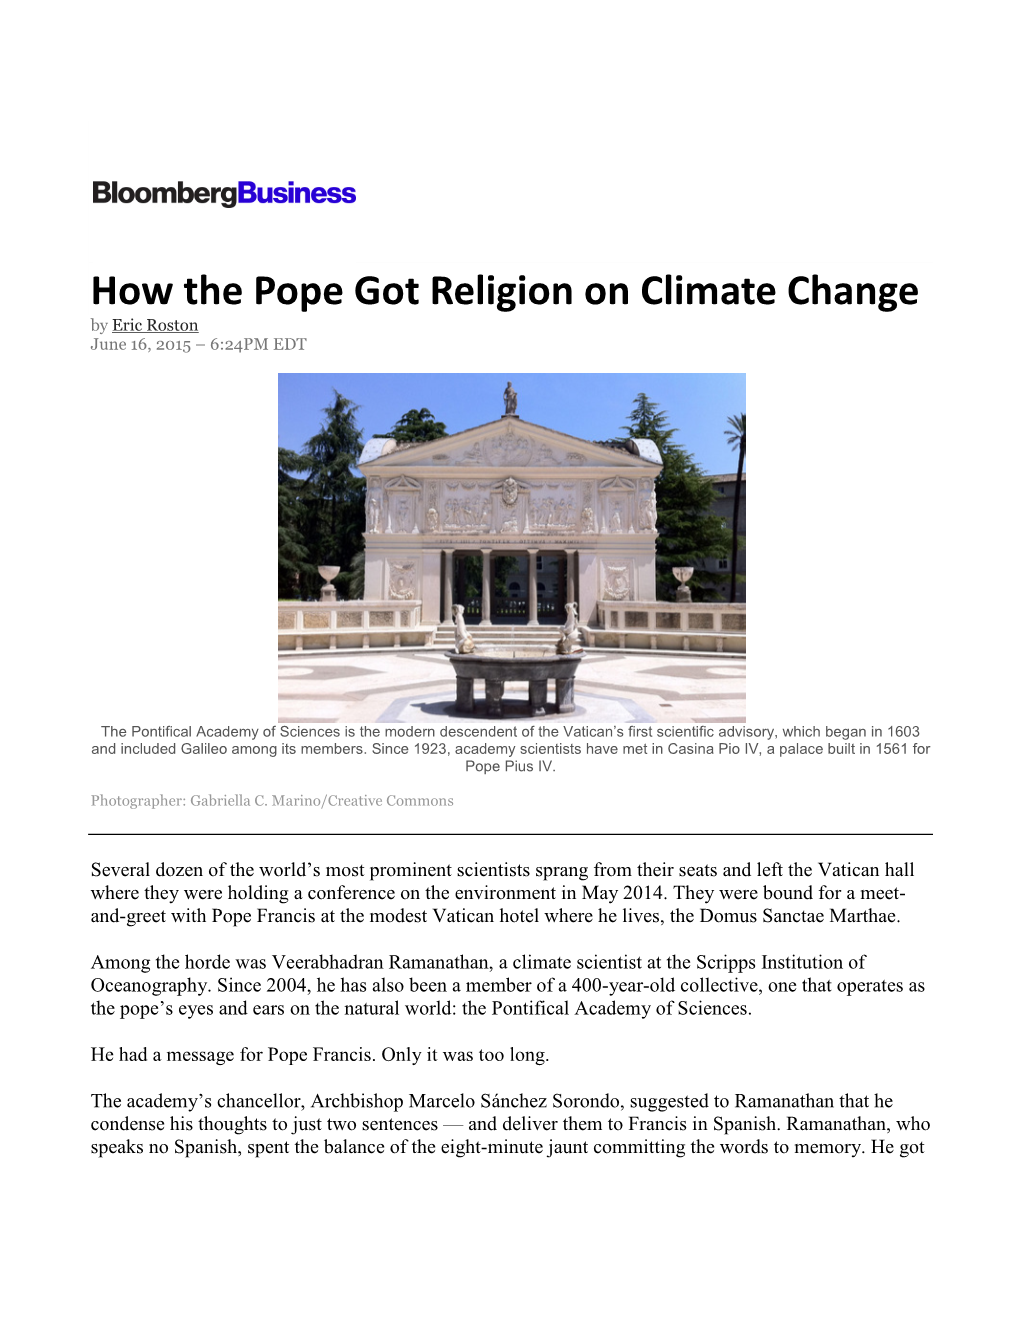 How the Pope Got Religion on Climate Change by Eric Roston June 16, 2015 – 6:24PM EDT